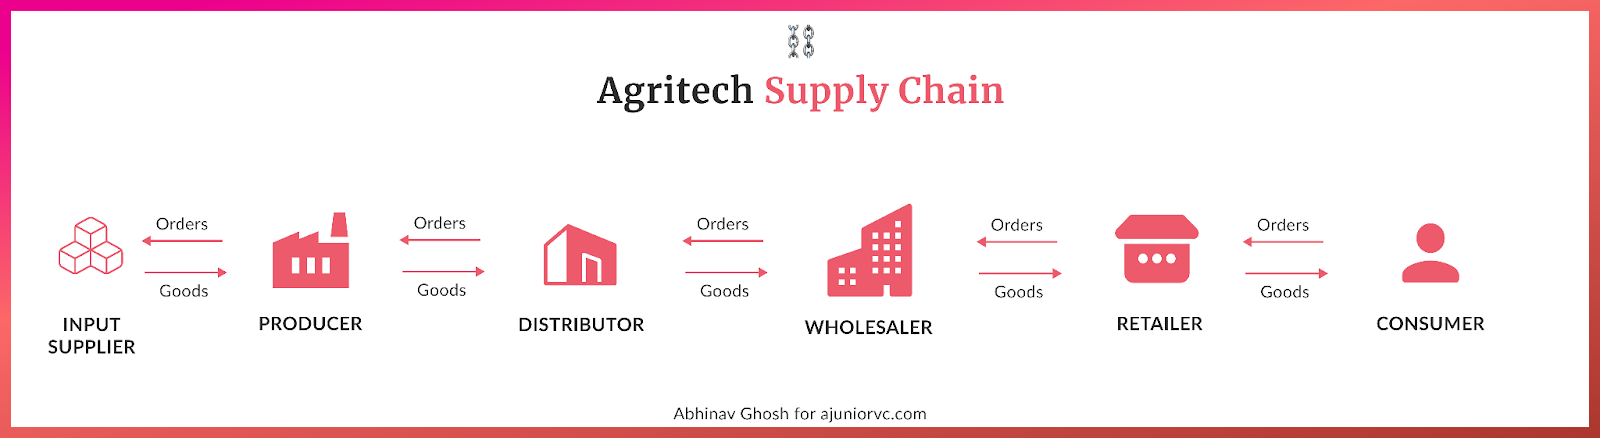 How the Agriculture Supply Chain works in details